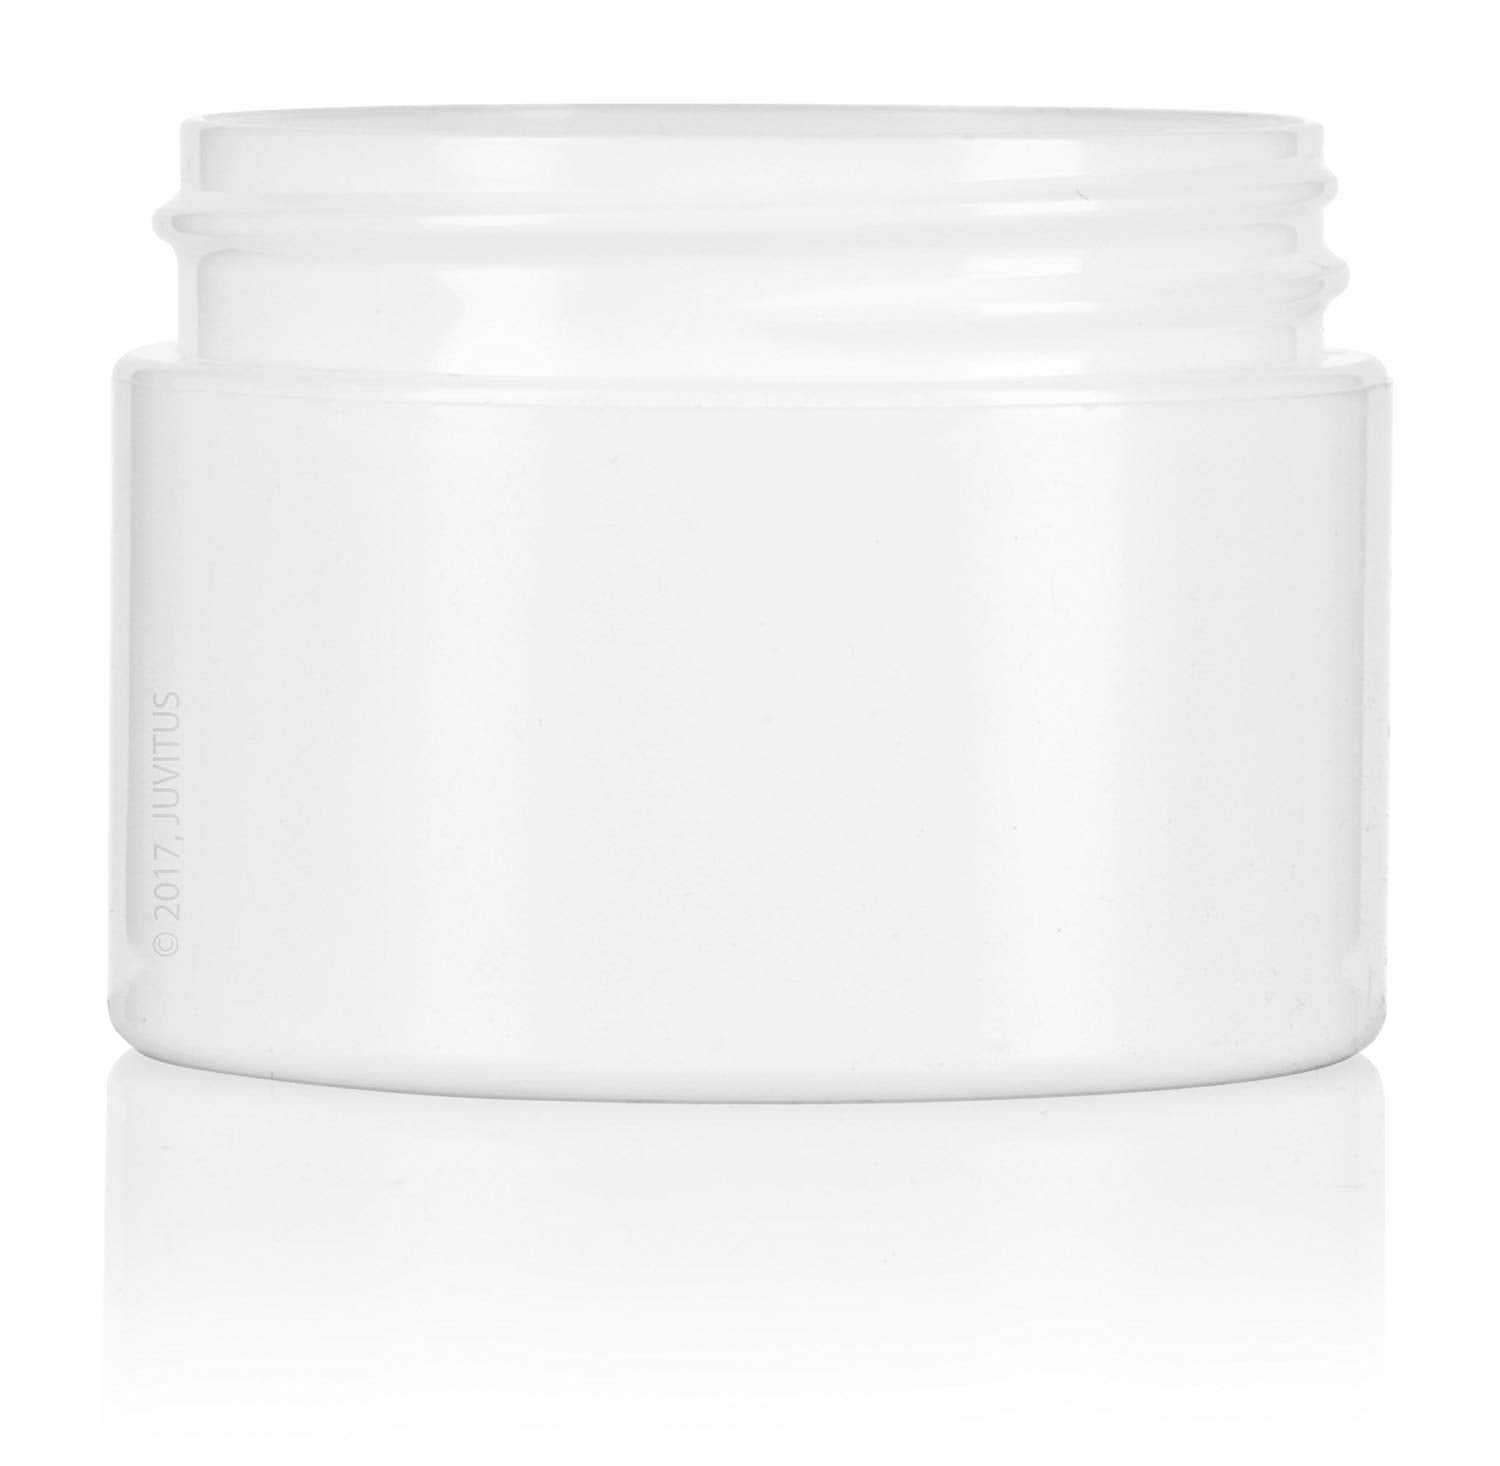 White Plastic Double Wall Jar With White Foam Lined Lid 2 Oz 60 Ml 12 Pack